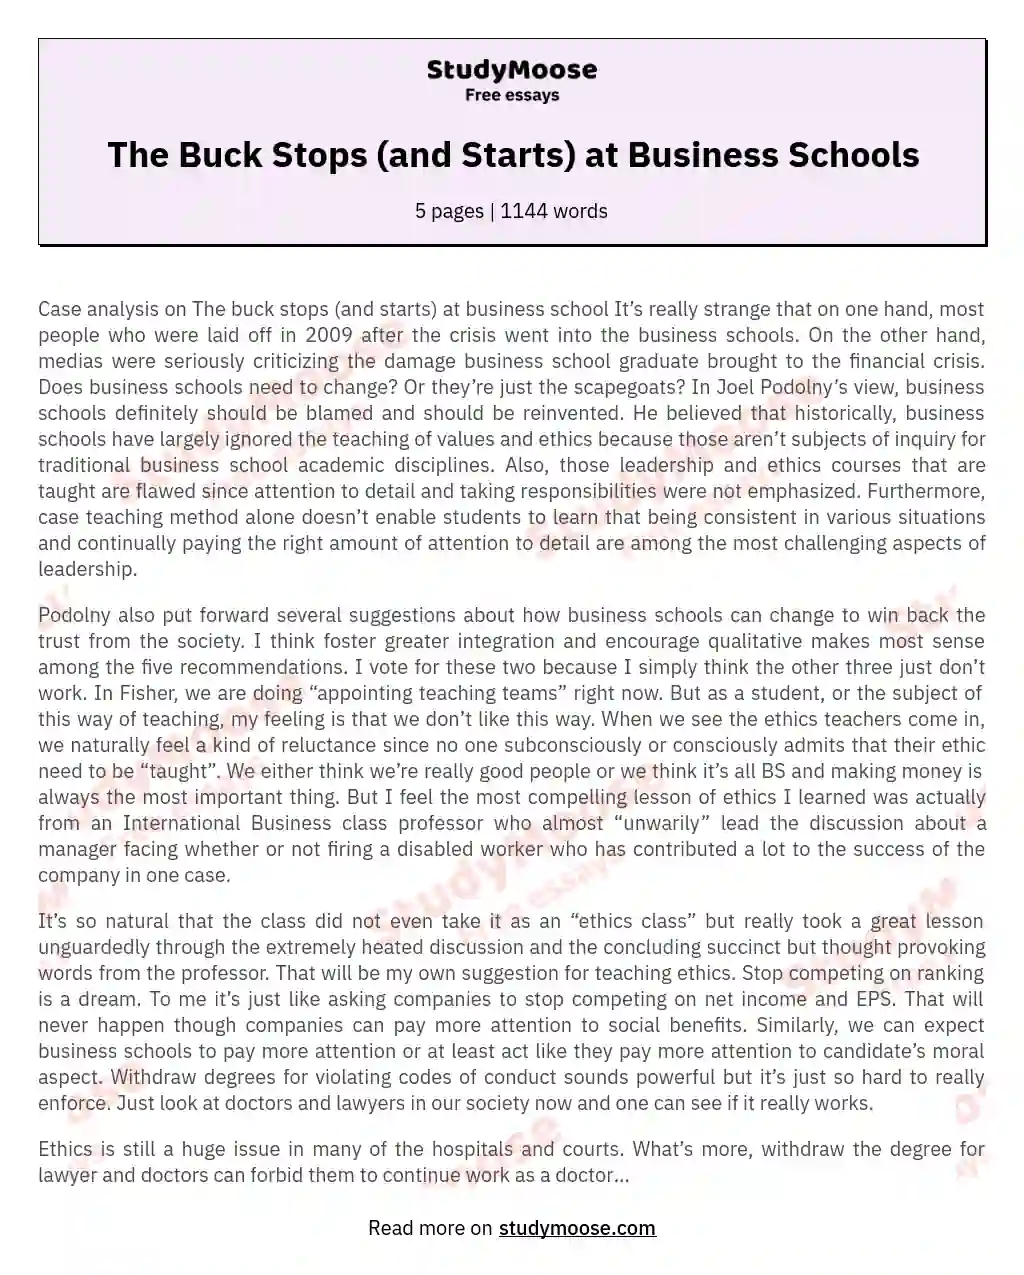 The Buck Stops (and Starts) at Business Schools essay